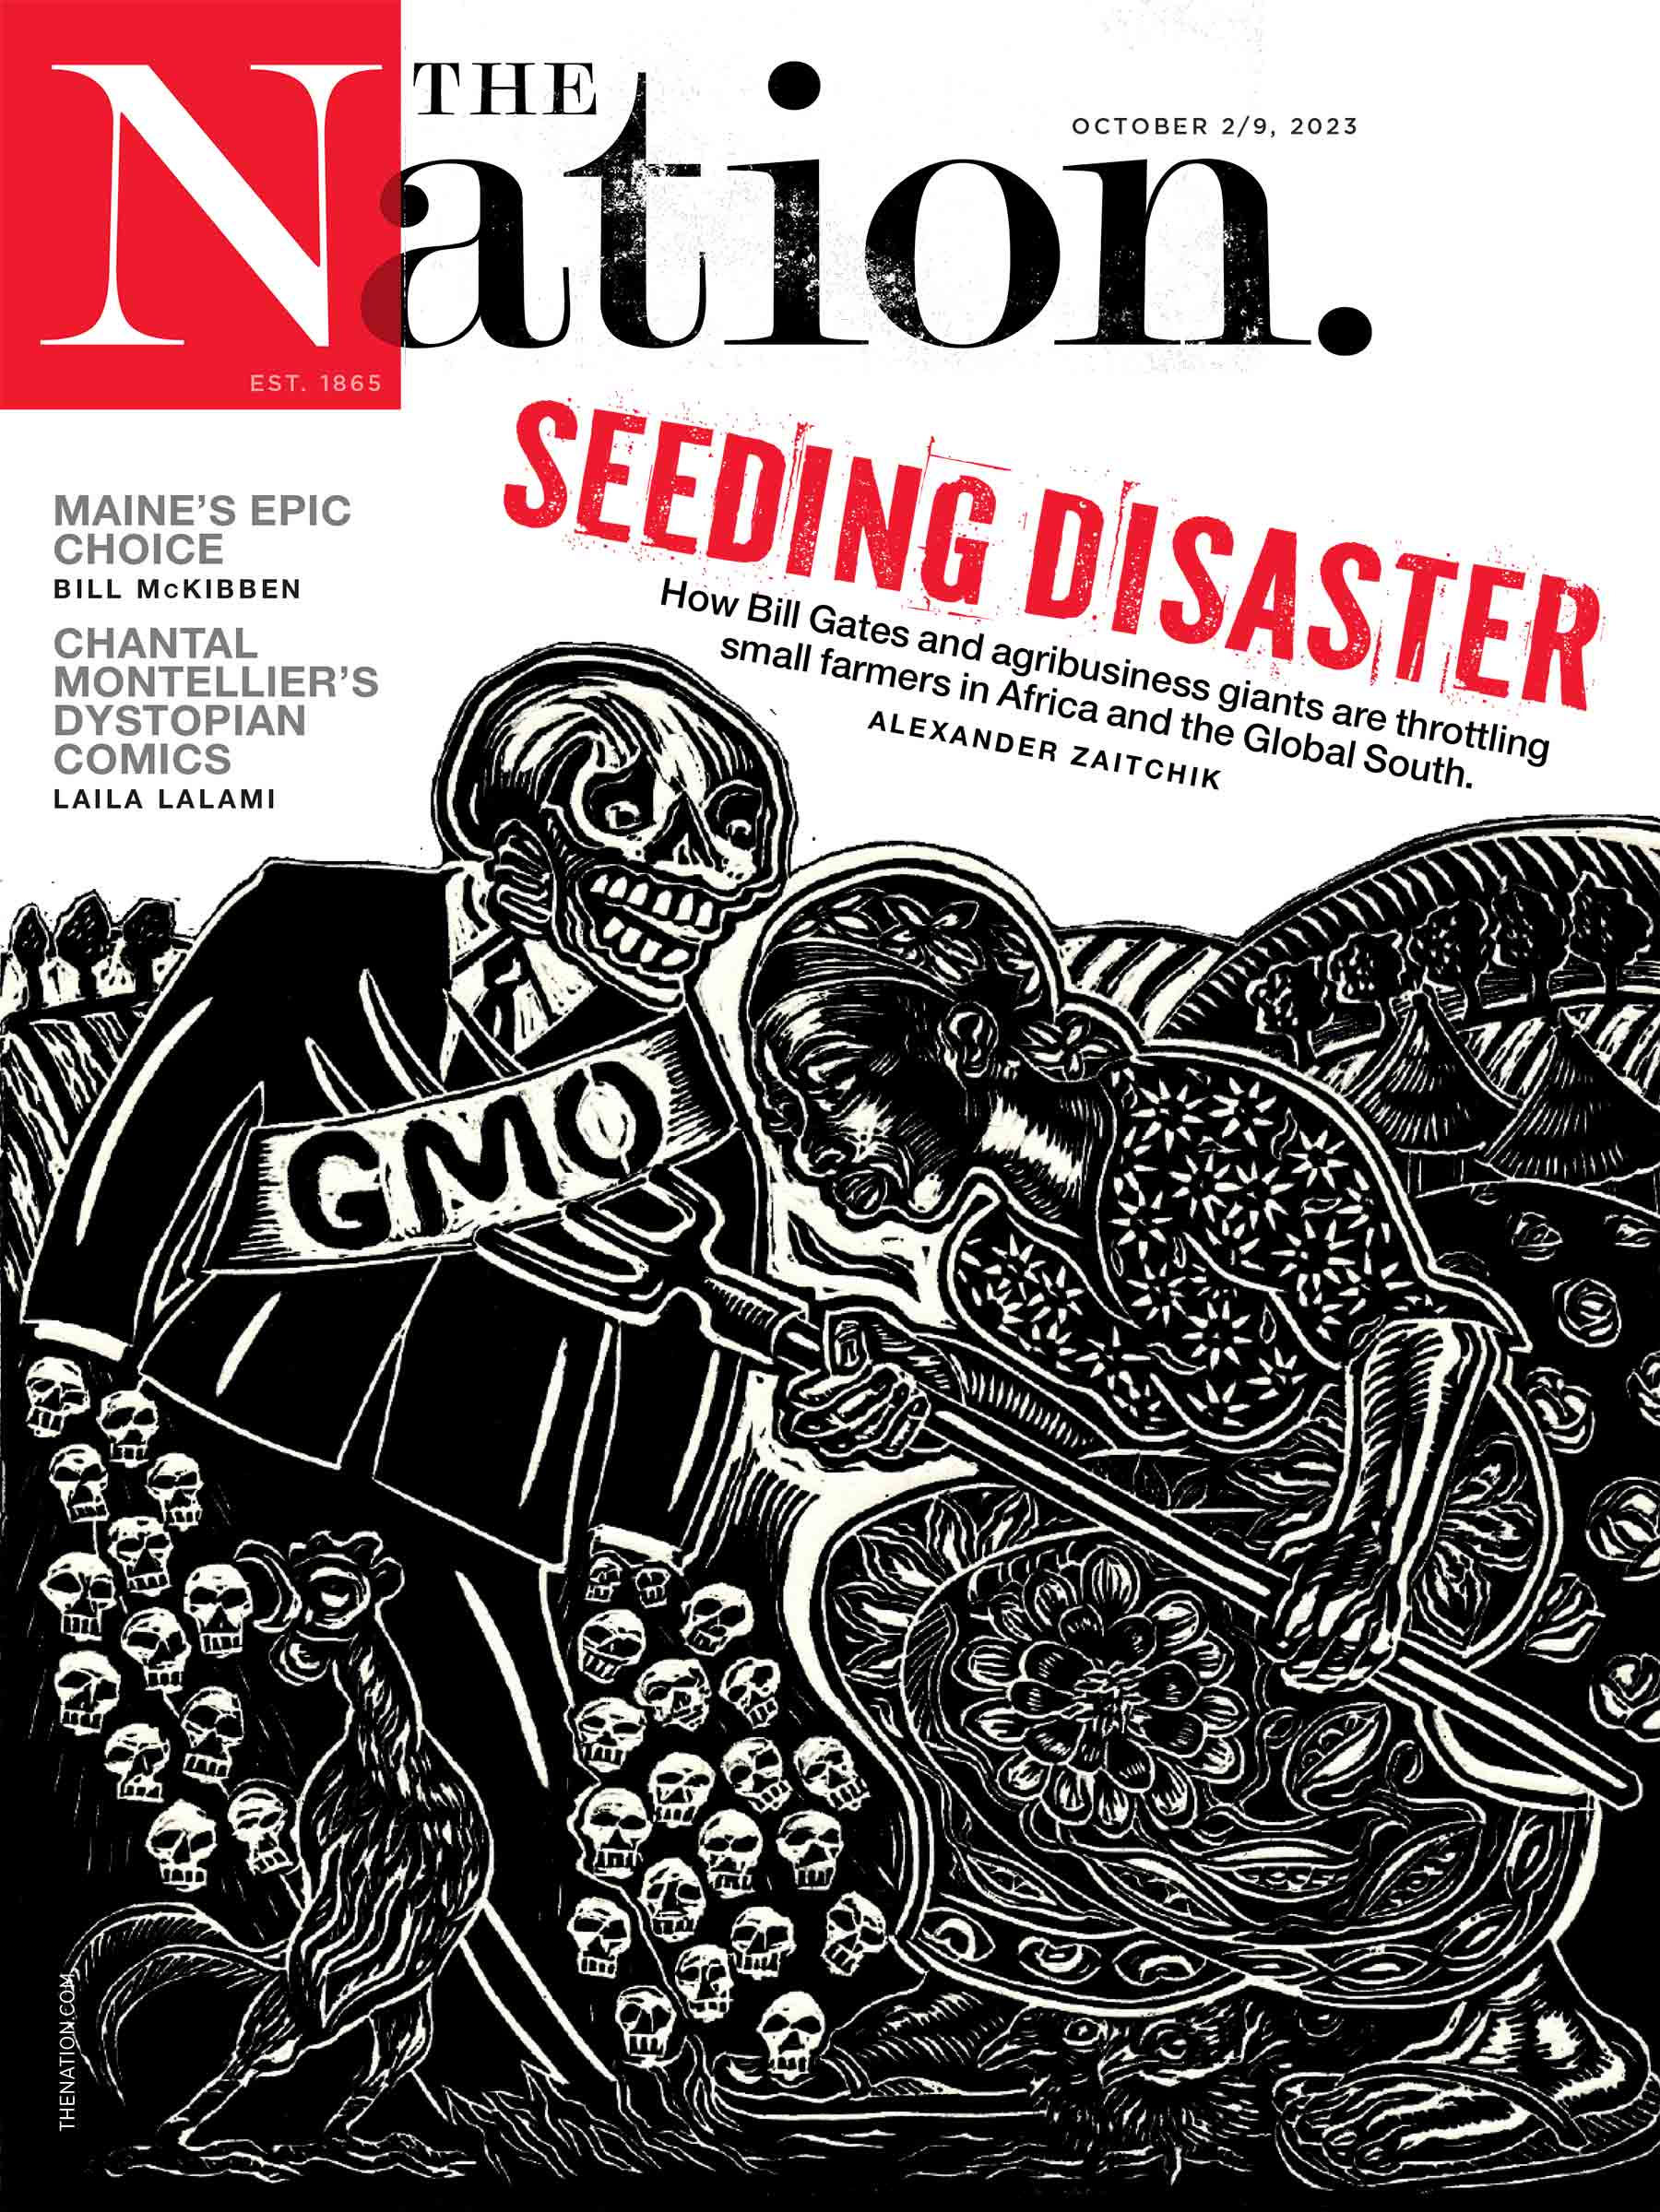 Cover of October 2/9, 2023, issue